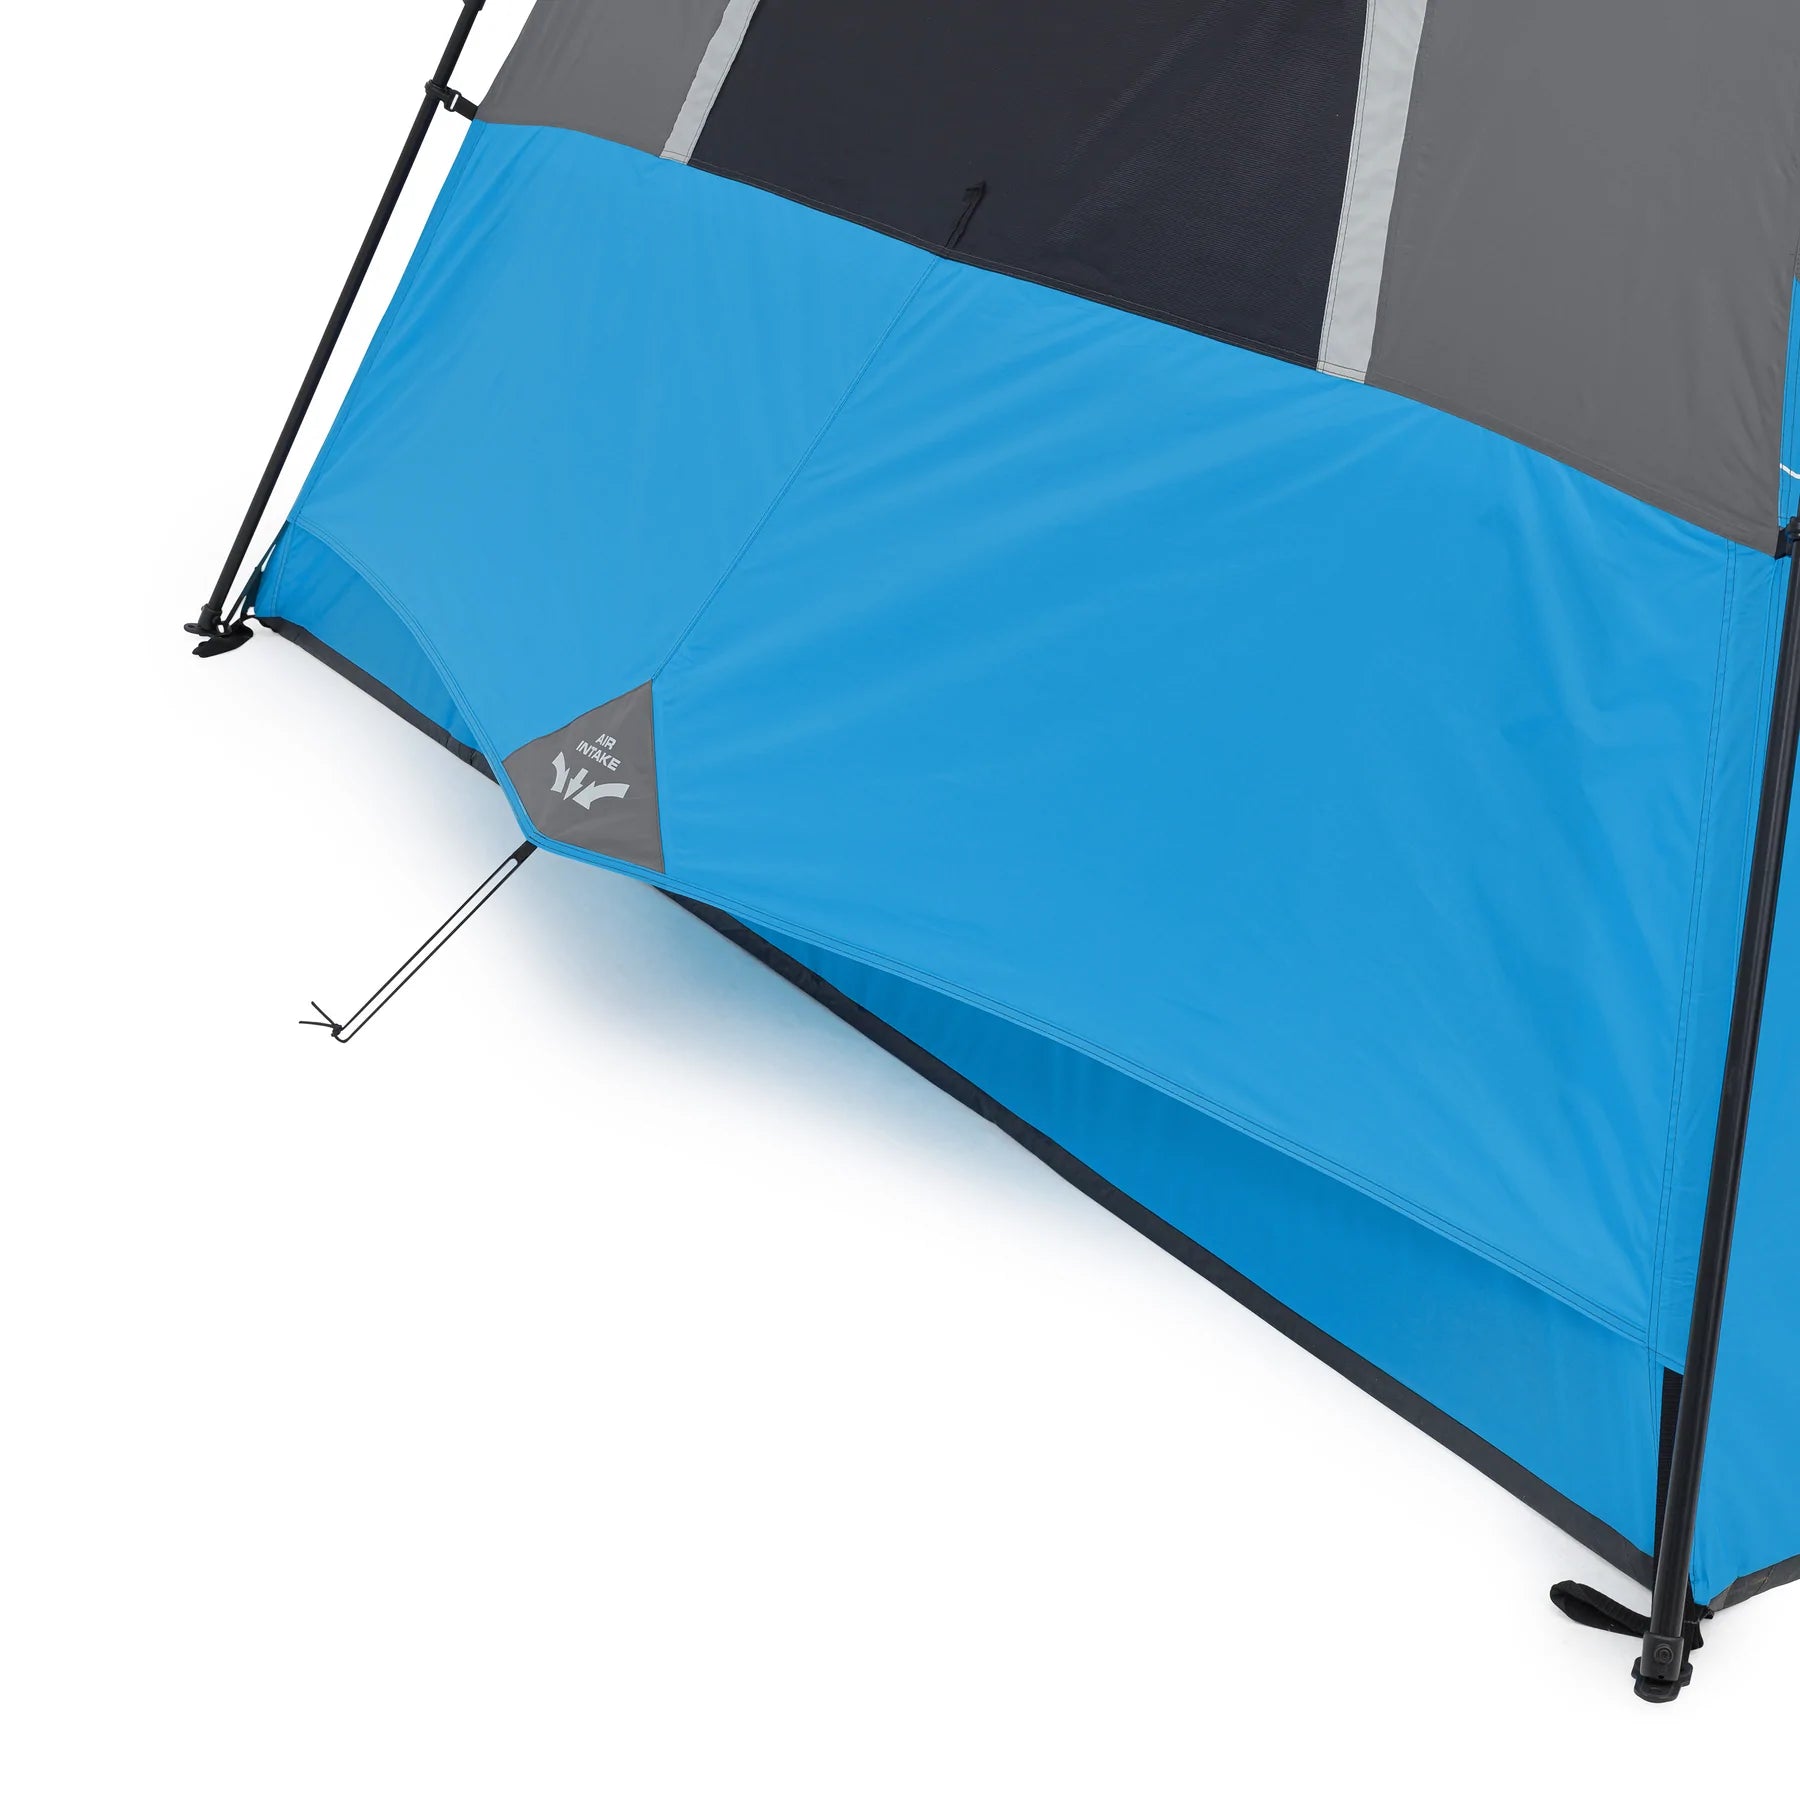 CORE Instant Tent with LED Lights, Portable Large Algeria